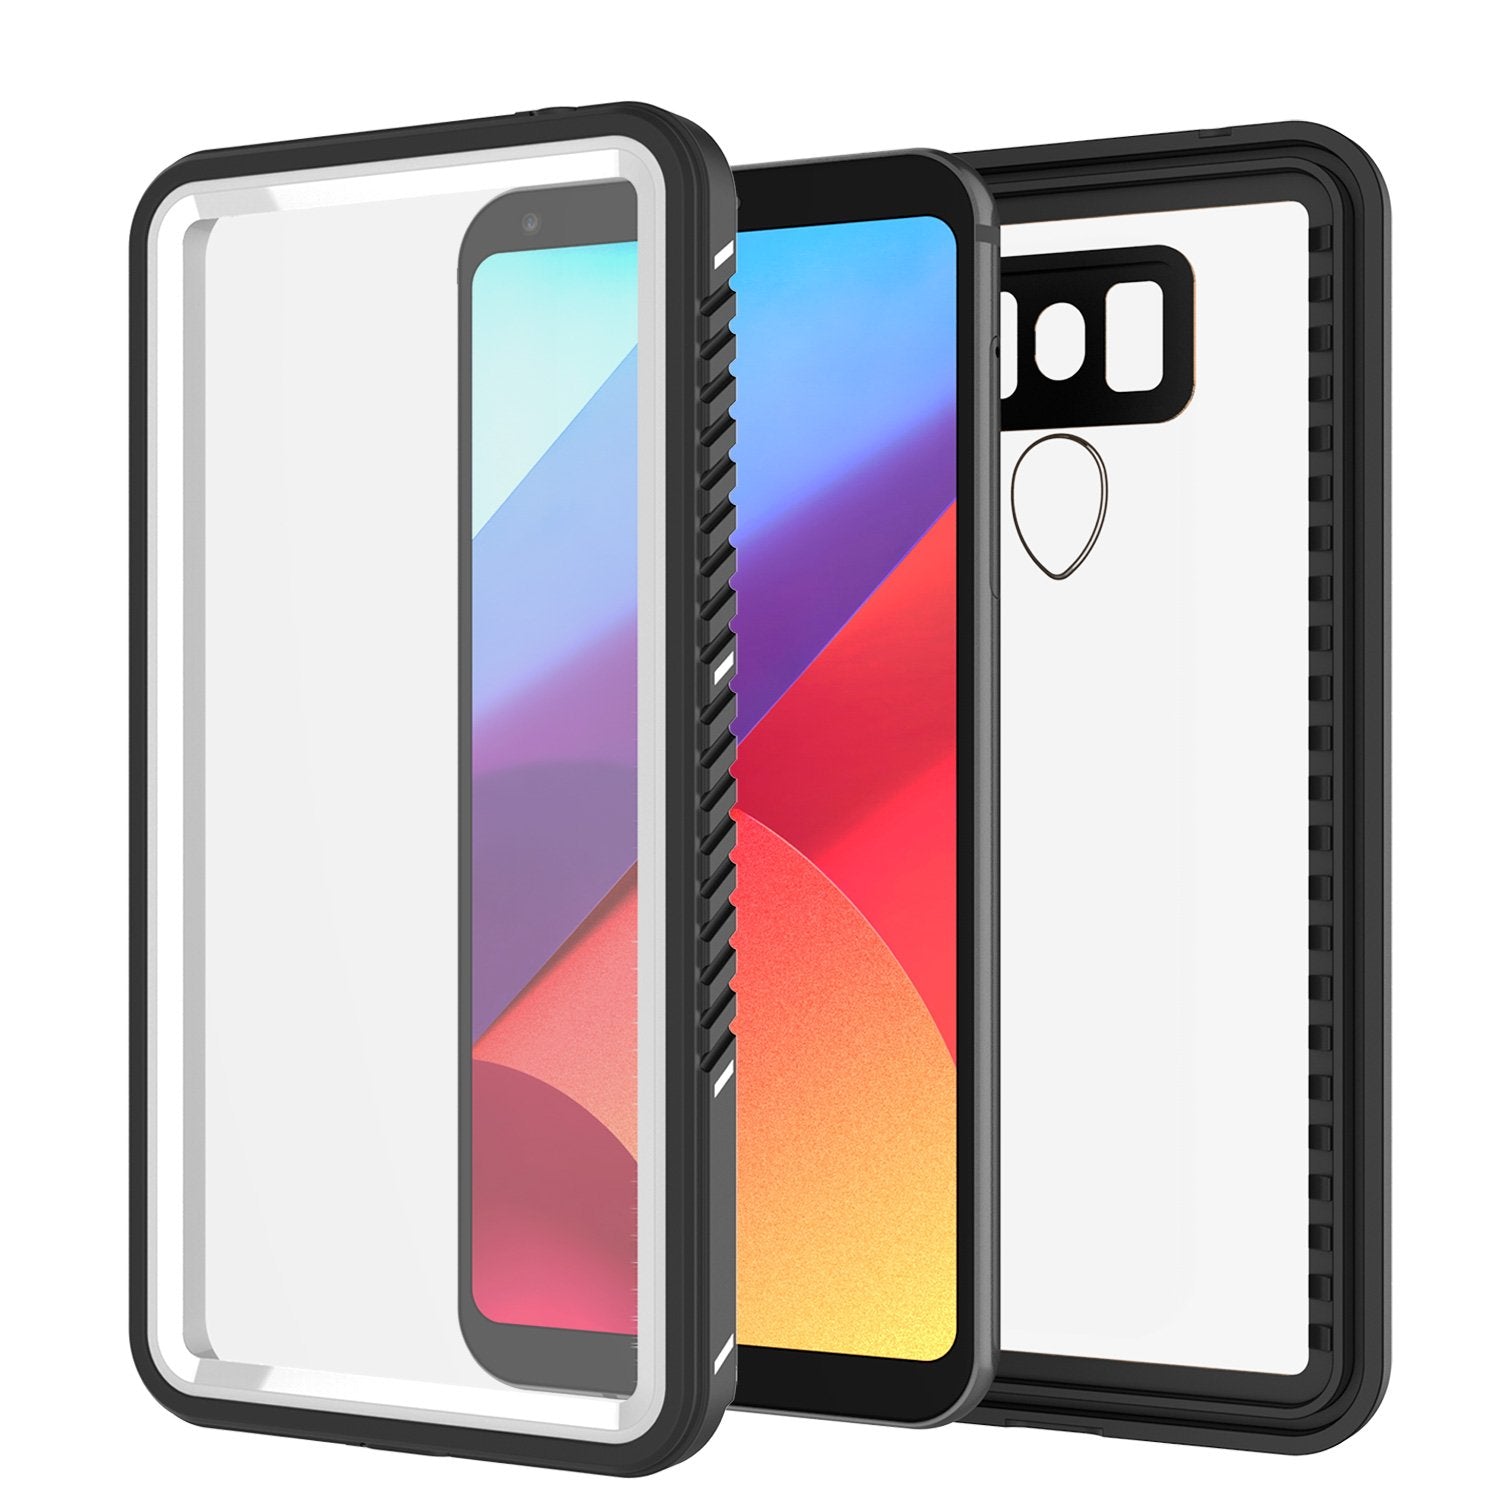 LG G6 Waterproof Case, Punkcase [Extreme Series] [Slim Fit] [IP68 Certified] [Shockproof] [Snowproof] [Dirproof] Armor Cover W/ Built In Screen Protector for LG G6 [WHITE] - PunkCase NZ